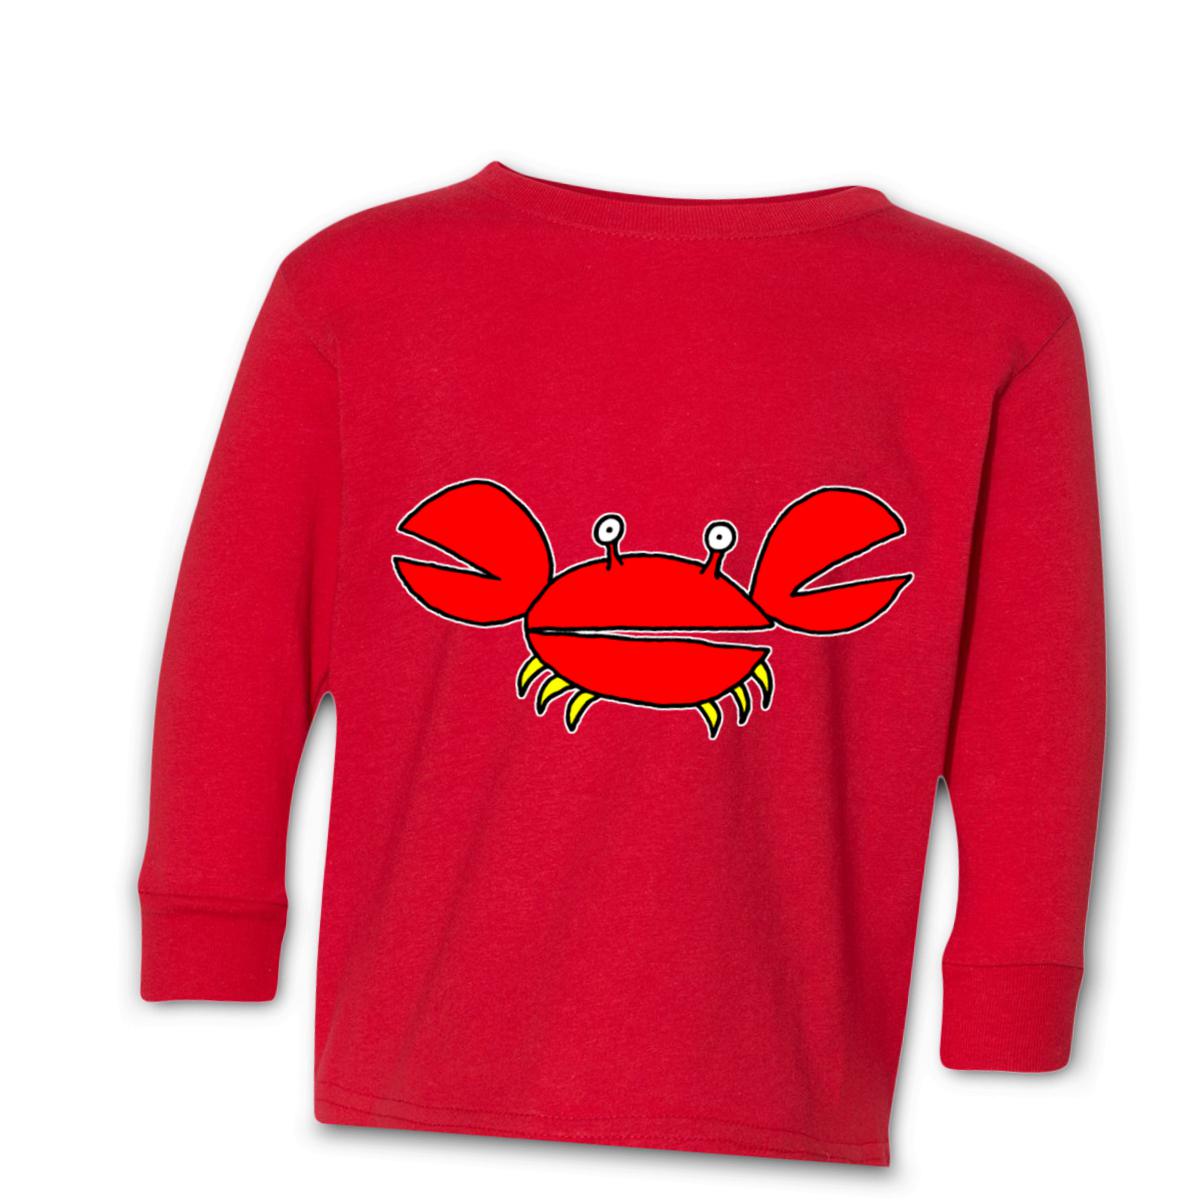 Crab Toddler Long Sleeve Tee 4T red